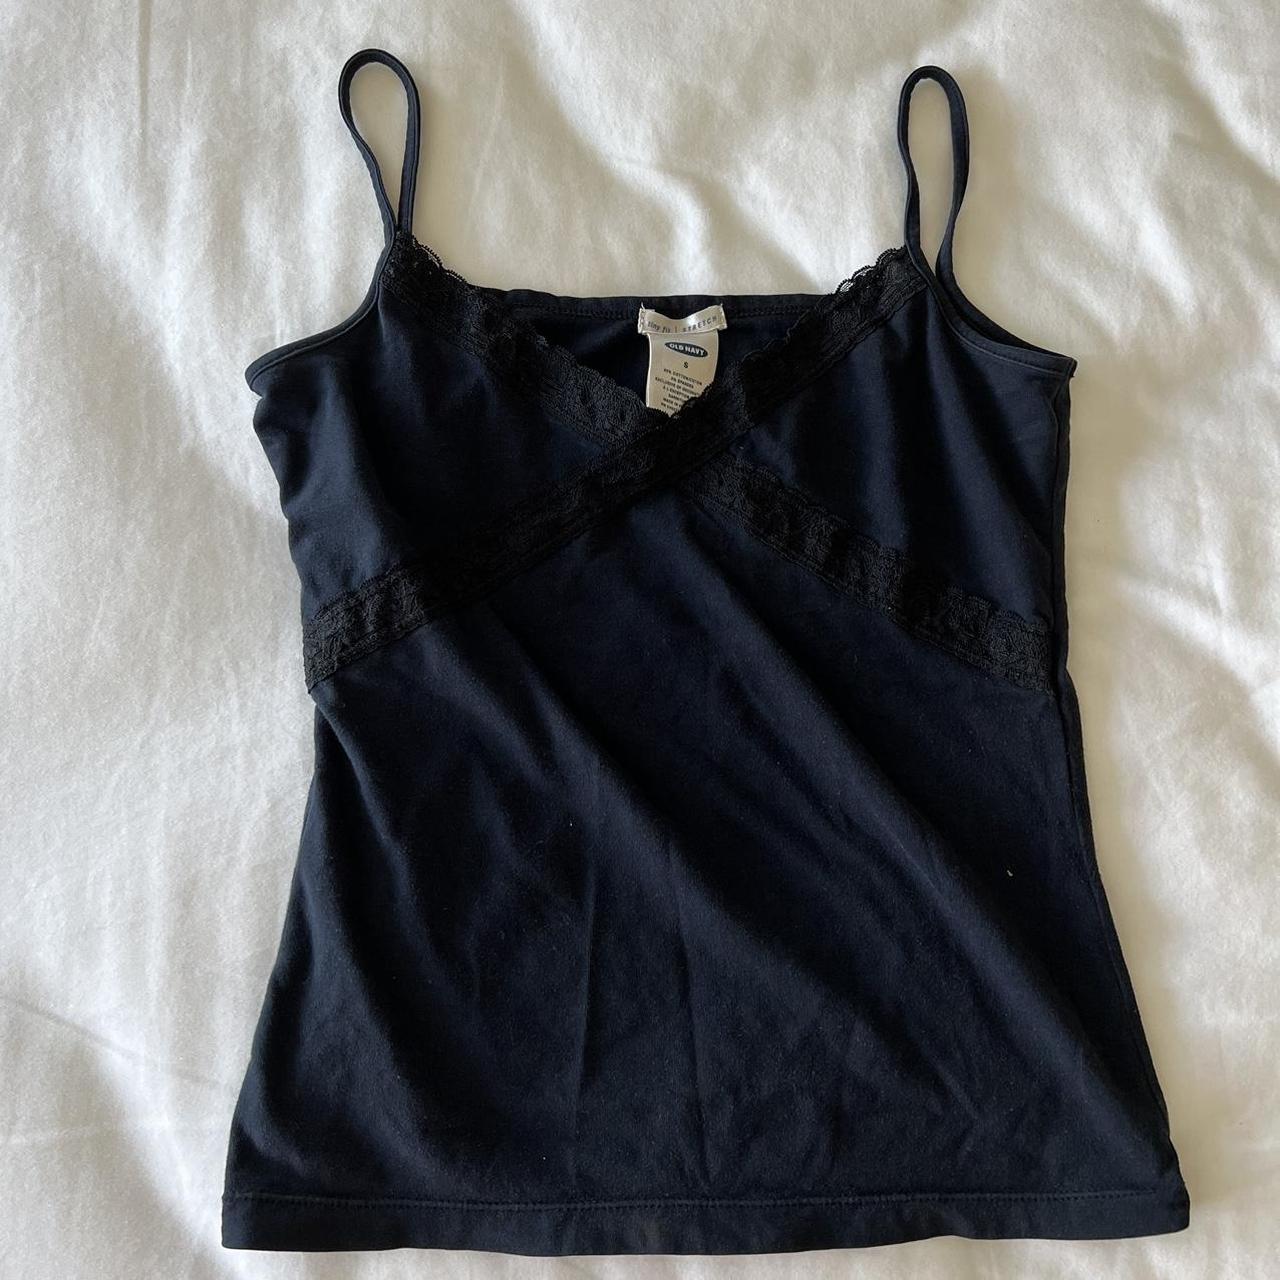 cute navy lace cross cami size xs to small, perf... - Depop